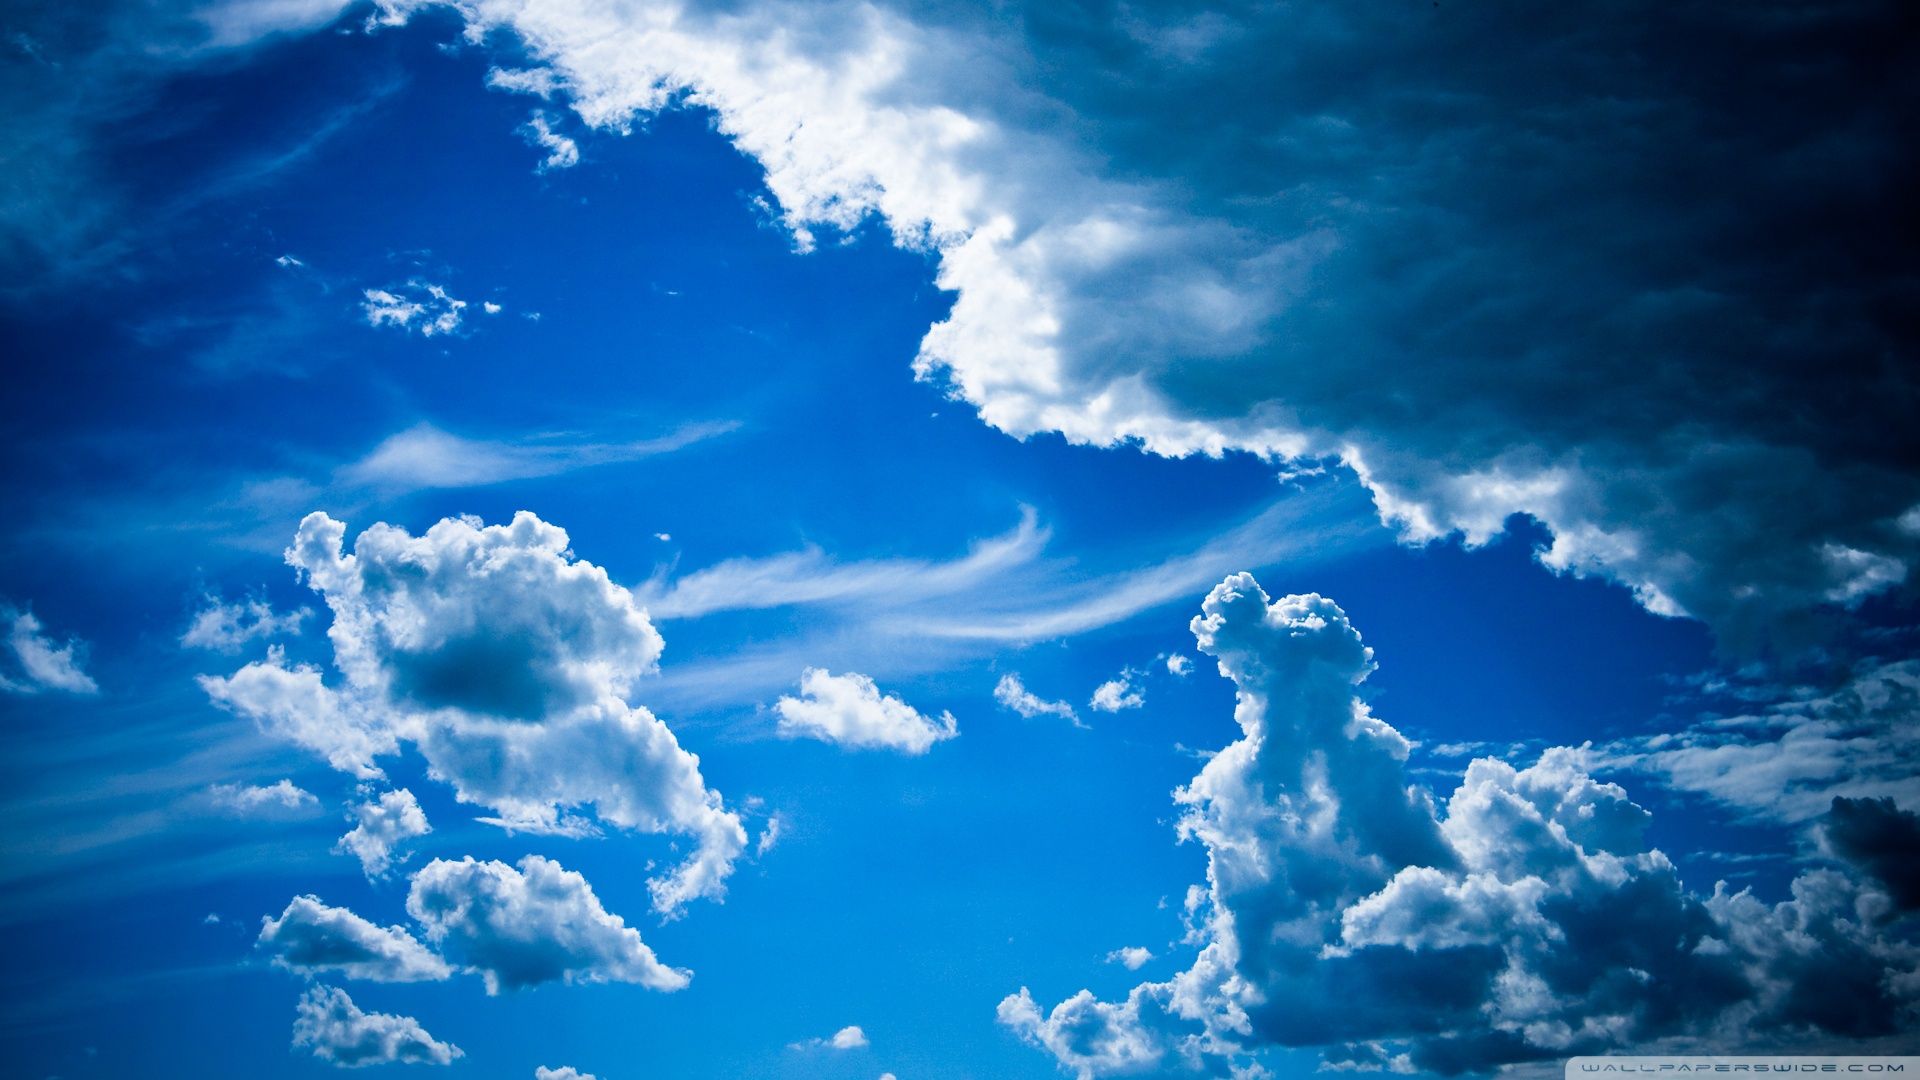 Blue Cloud Background for Websites. Cloud Kingdom Hearts Wallpaper, Toy Story Cloud Wallpaper and Cloud Wallpaper